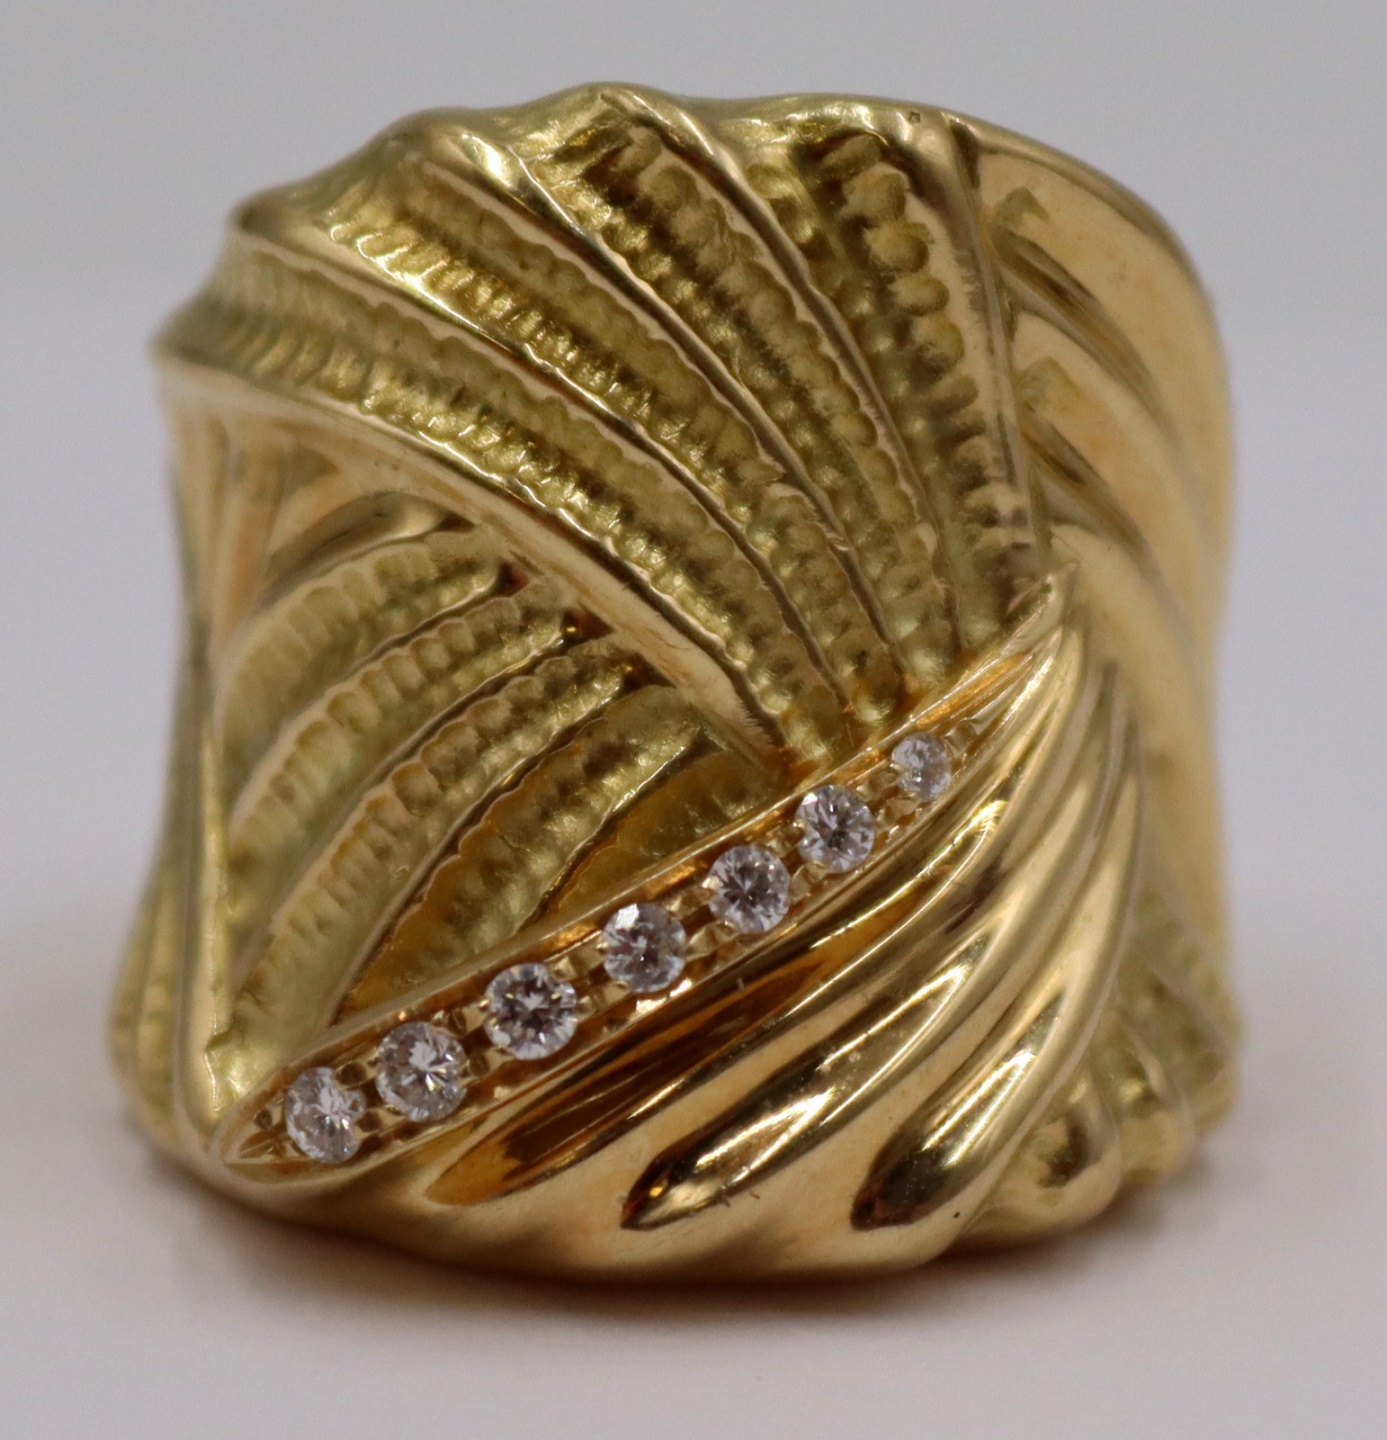 JEWELRY. SIGNED AUGUSTO 18KT GOLD